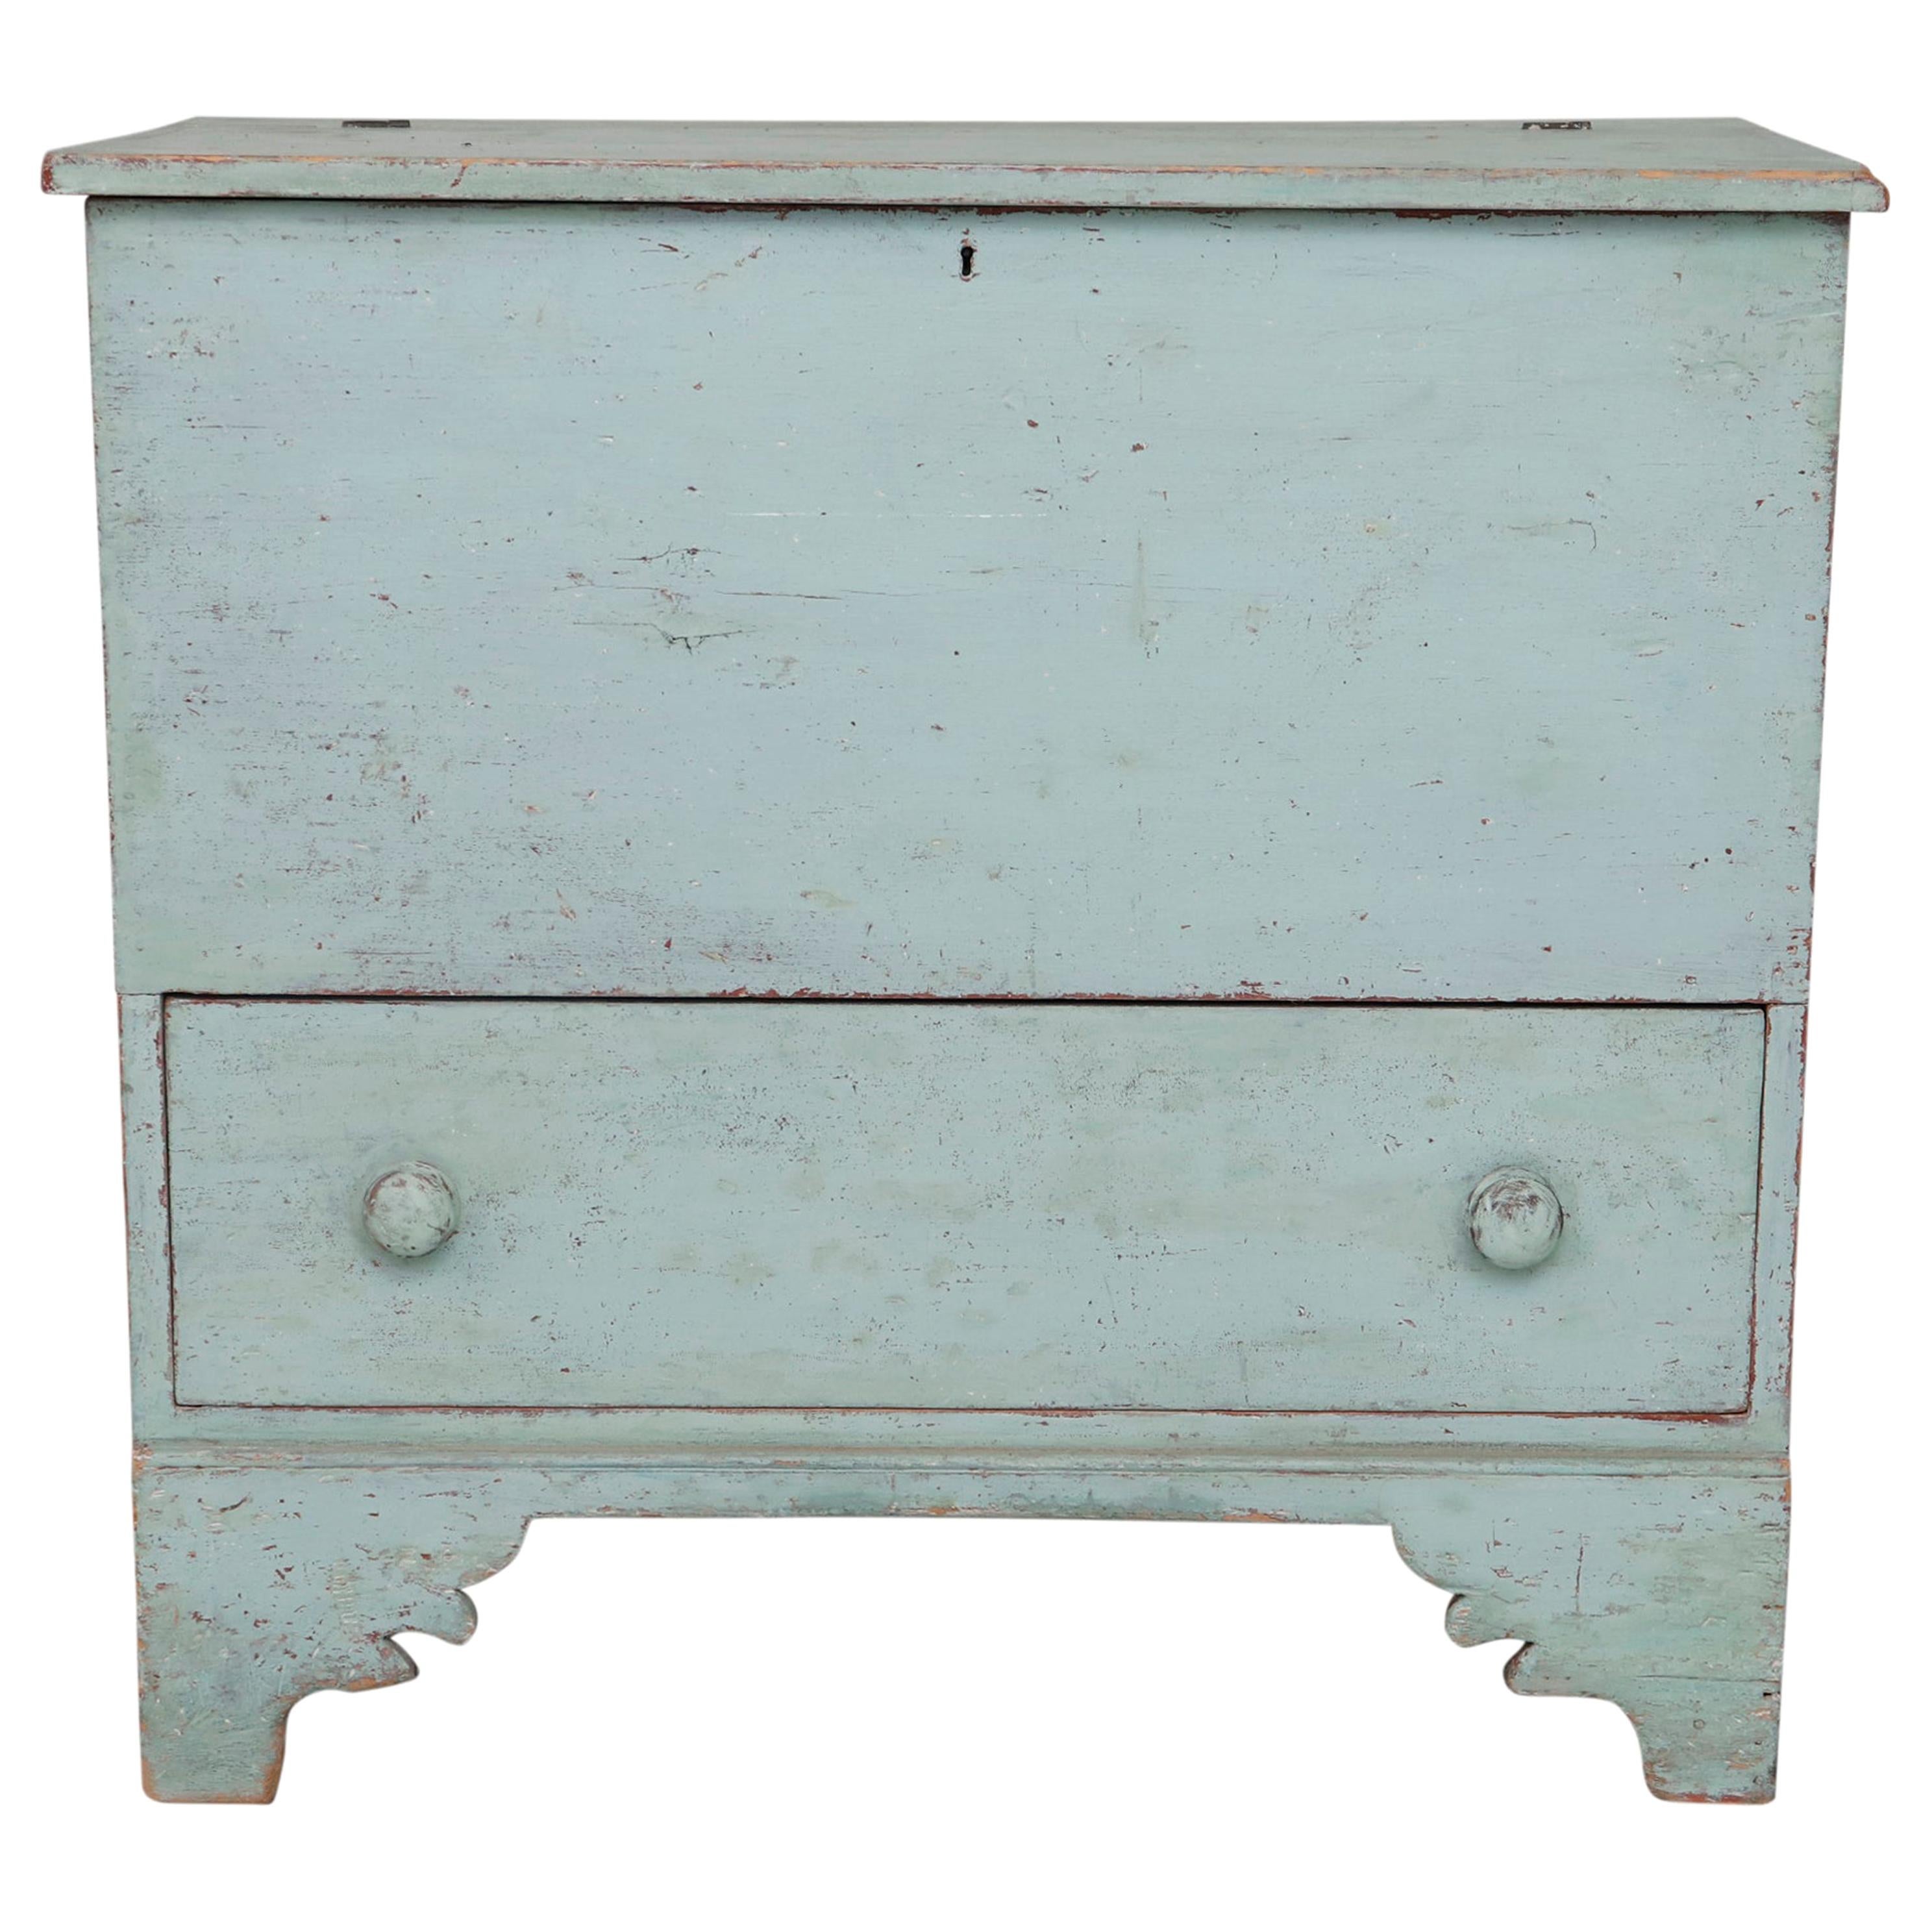 19th Century American Chest in Pale Blue